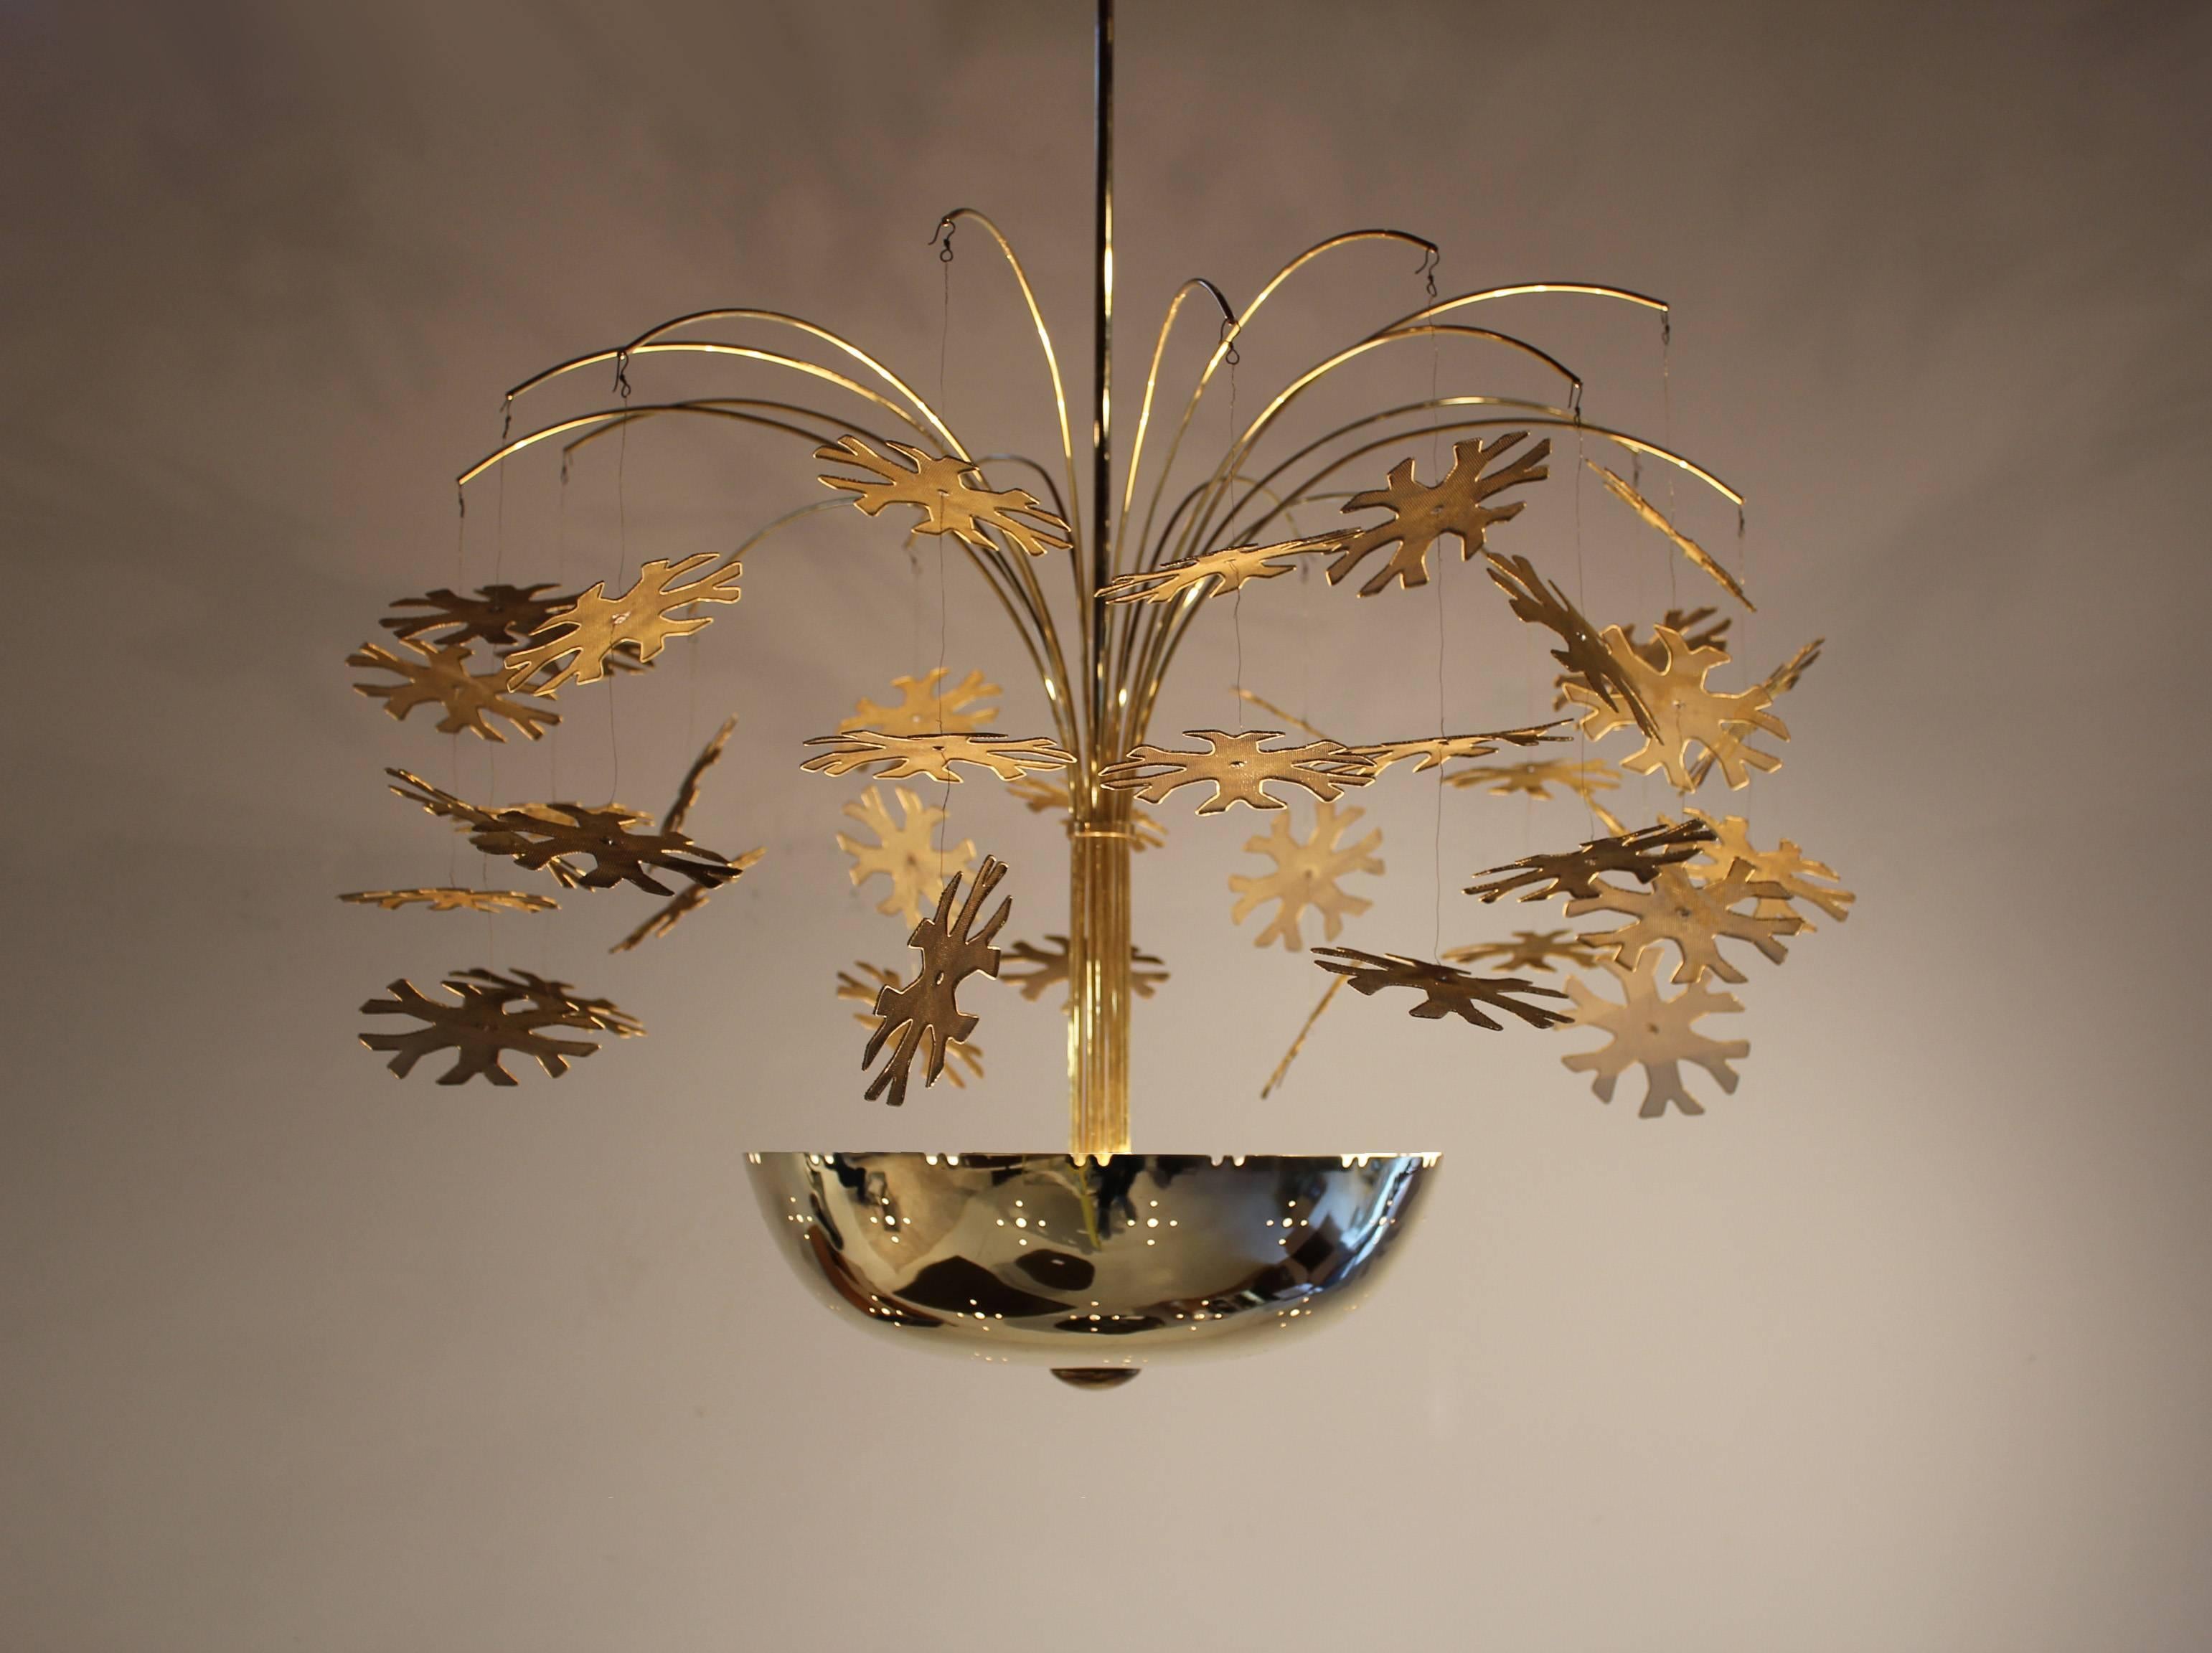 This is the quintessential Scandinavian modernist Snowflake chandelier by Paavo Tynell for Taito Oy and is currently on display in the 20cdesign showroom in Dallas Texas. This breathtaking chandelier casts a warm glow of light from the intricately